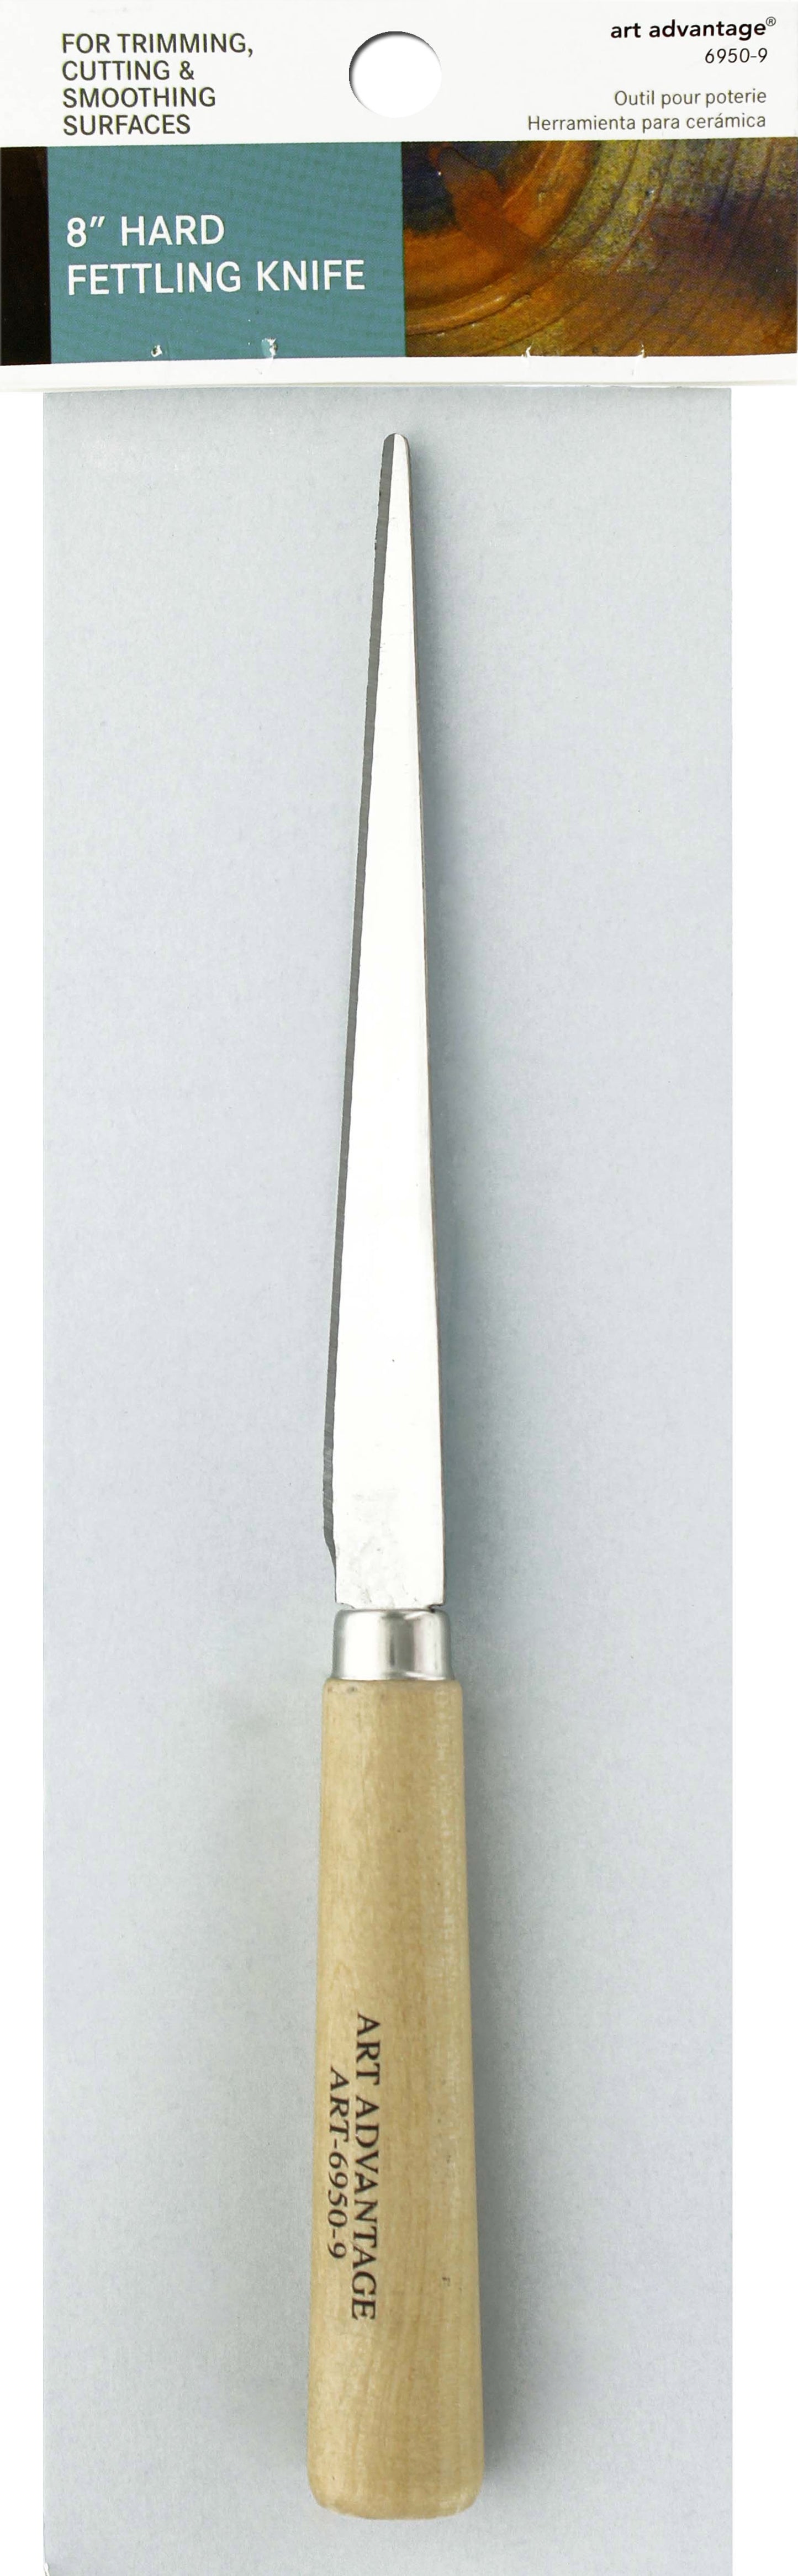 FETTLING KNIFE 8 INCHES